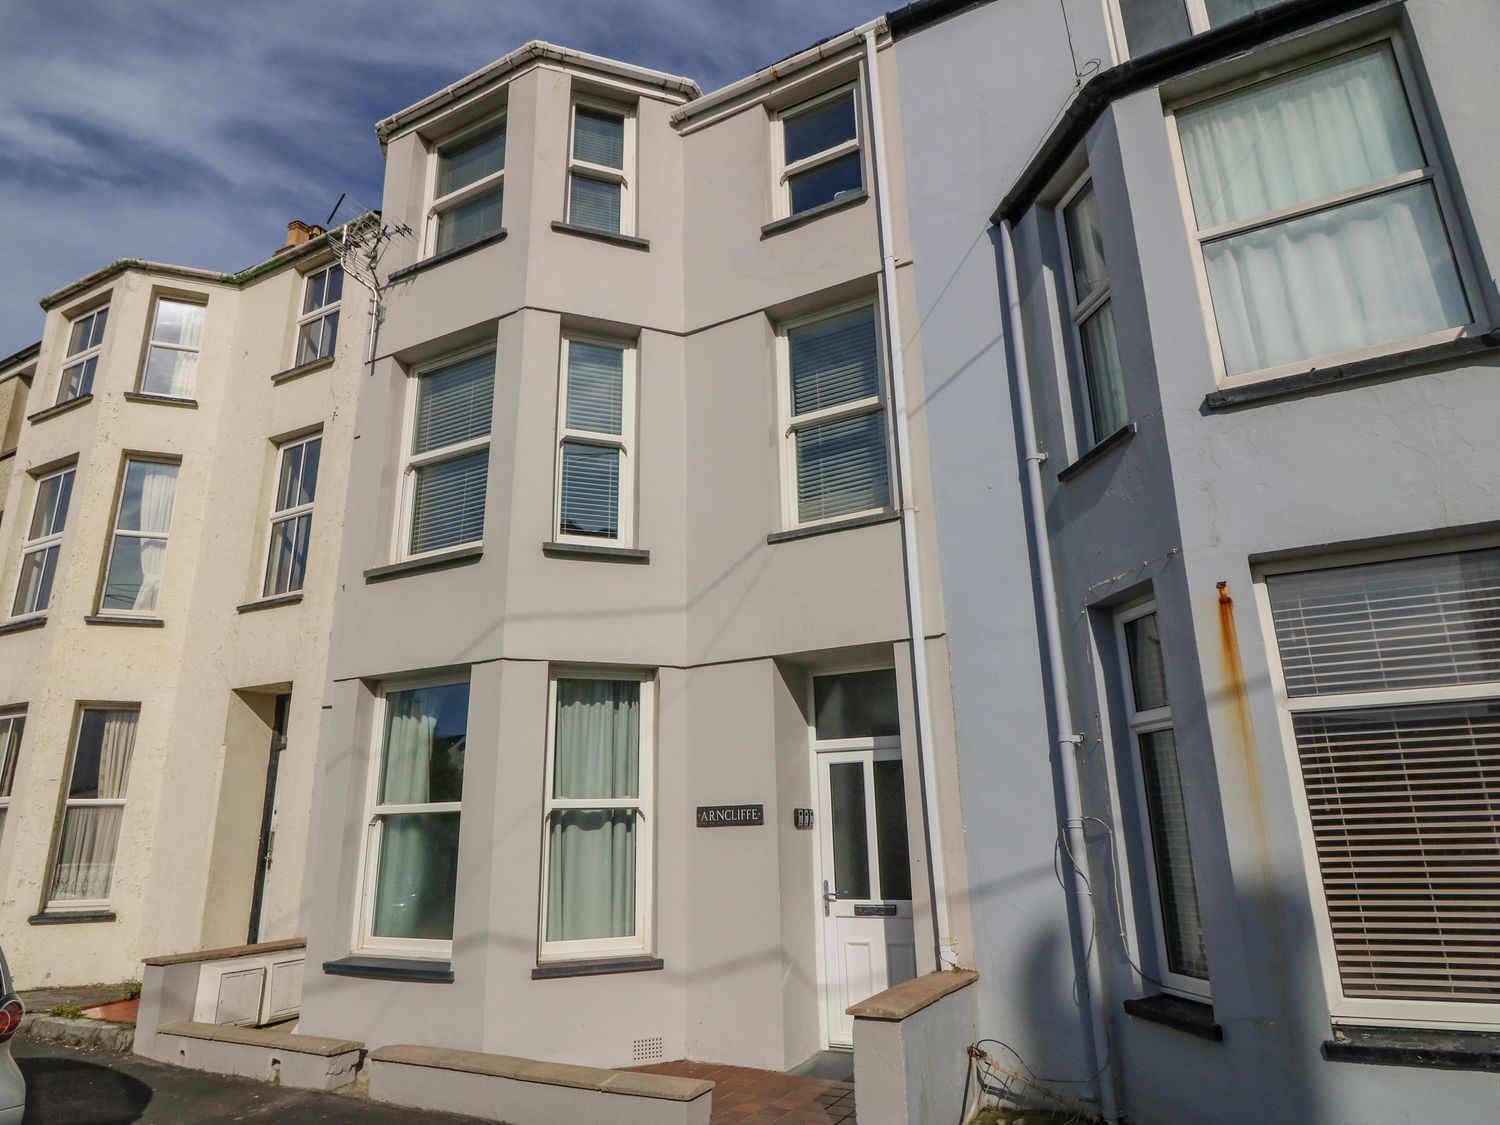 Y Castell Apartment 3 - North Wales - 926396 - photo 1